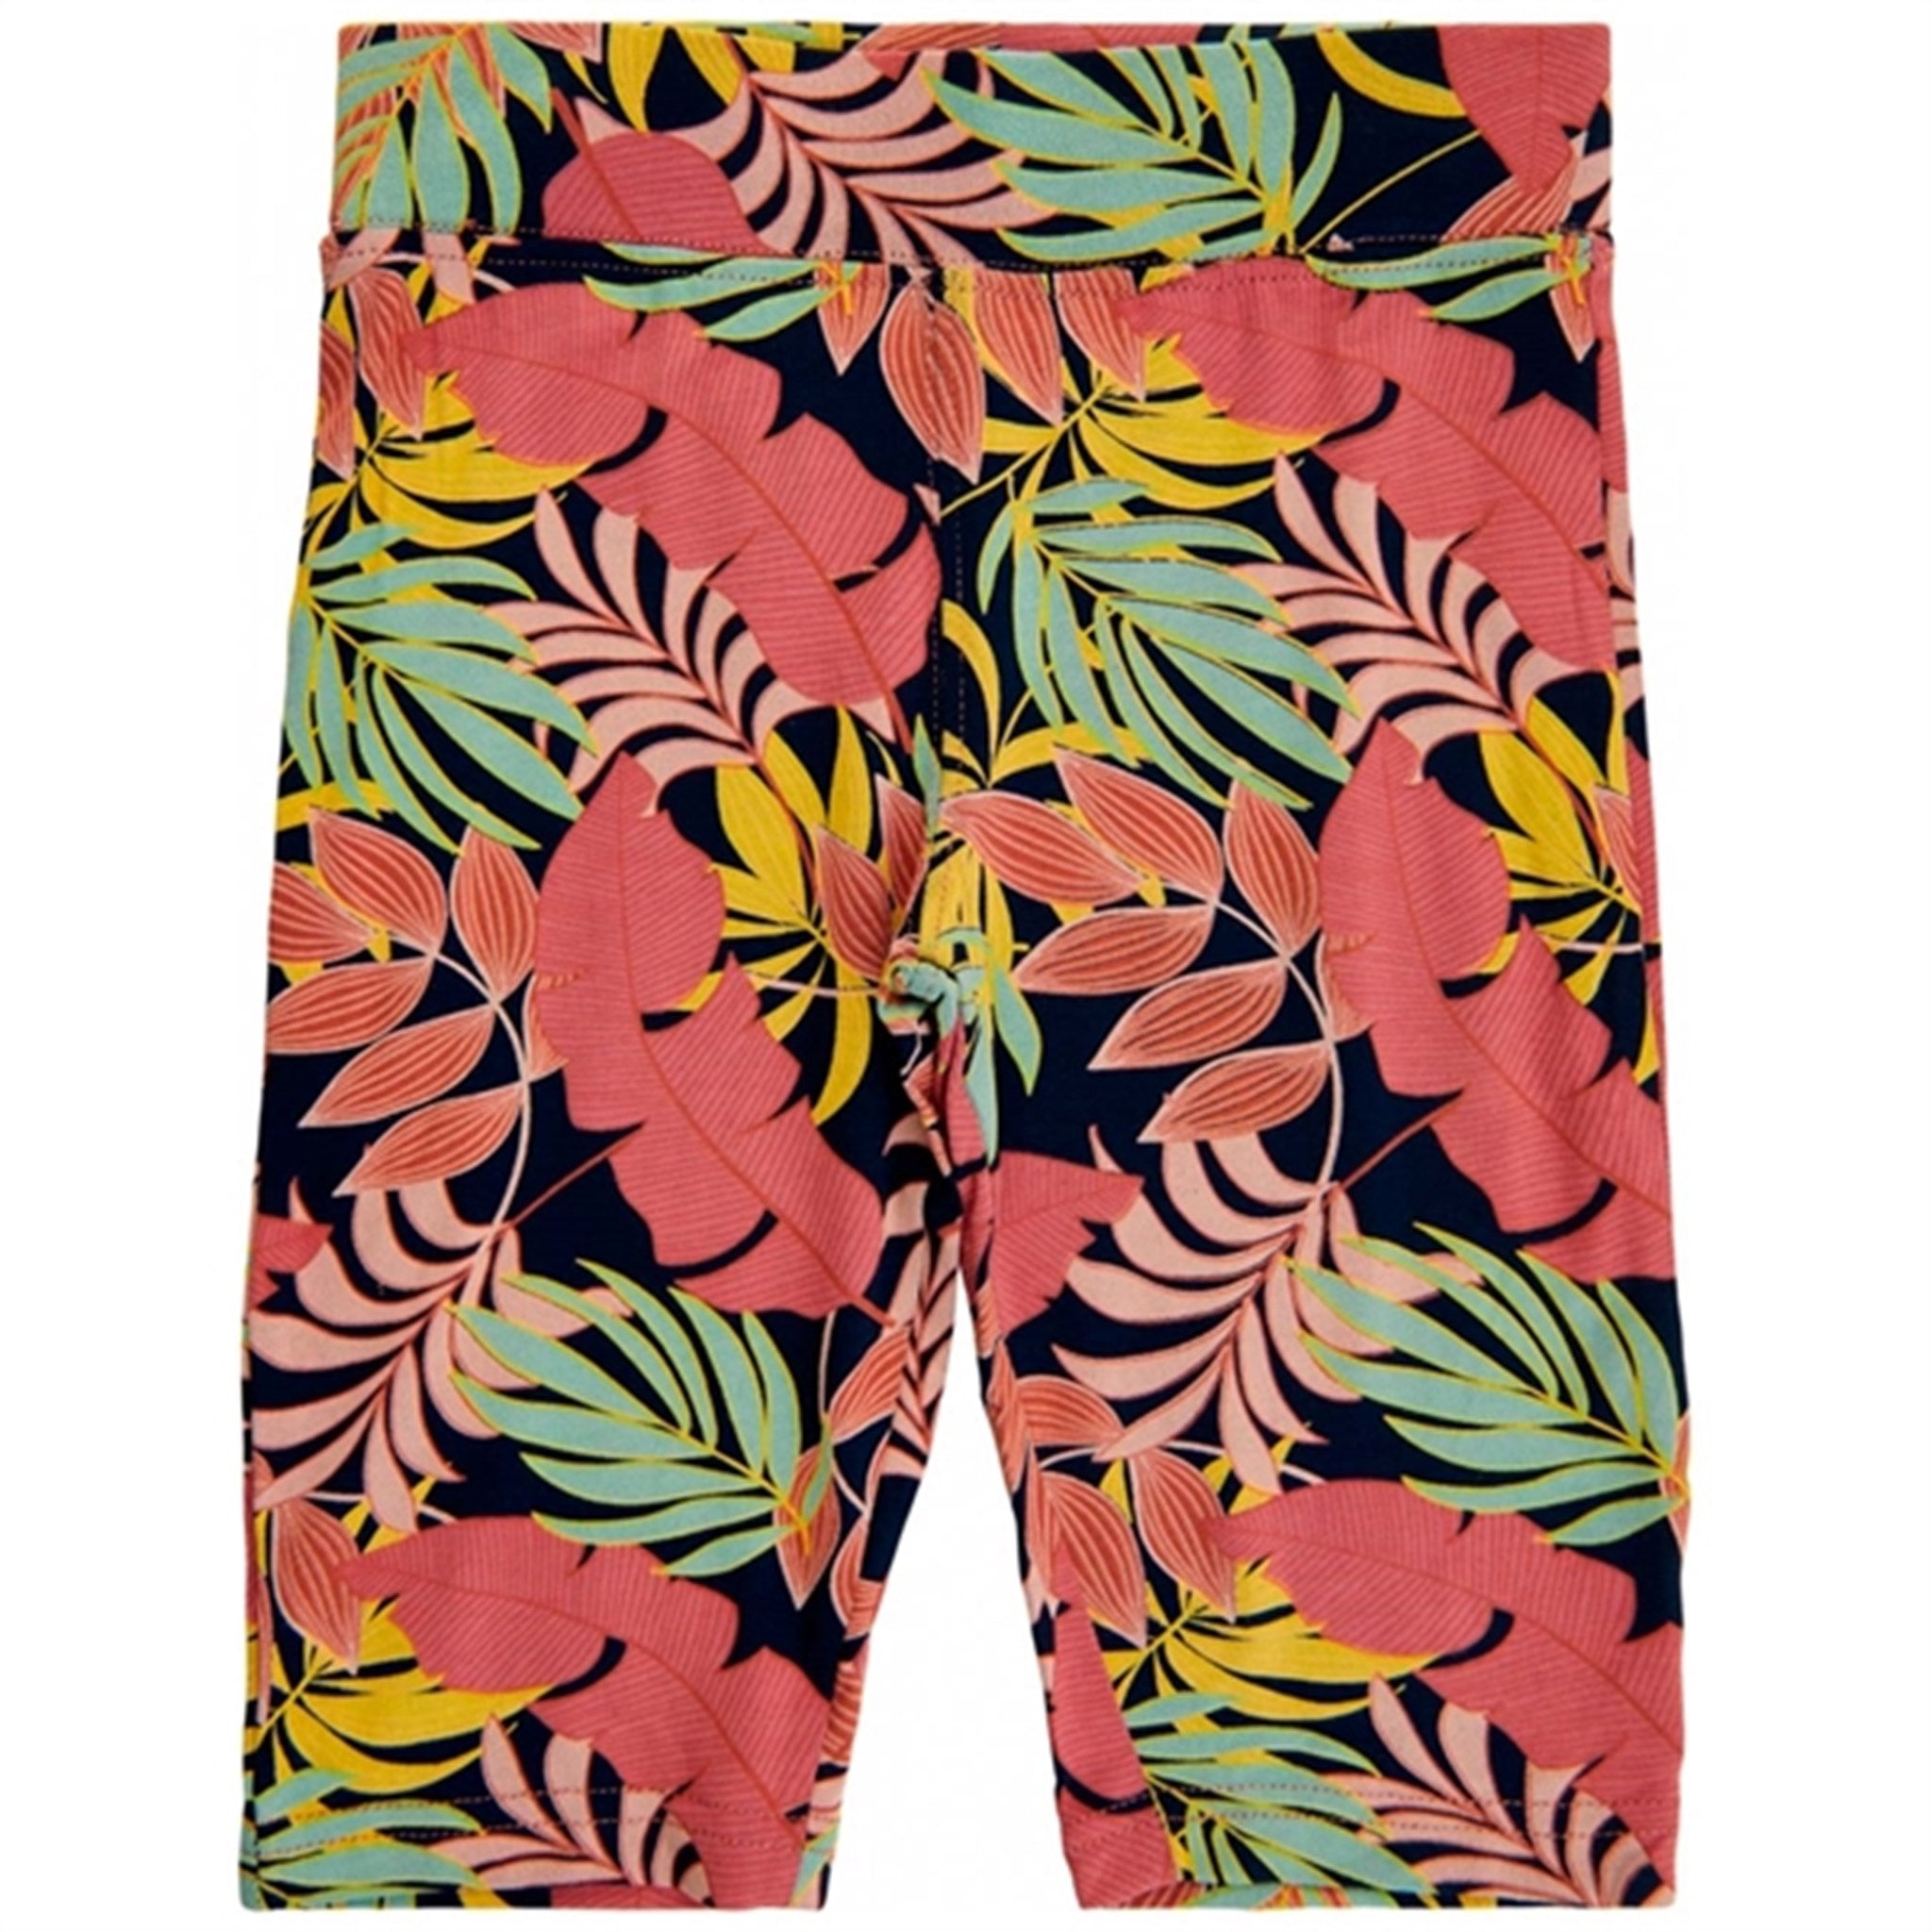 The New Tropic AOP Calypso Cycle Shorts